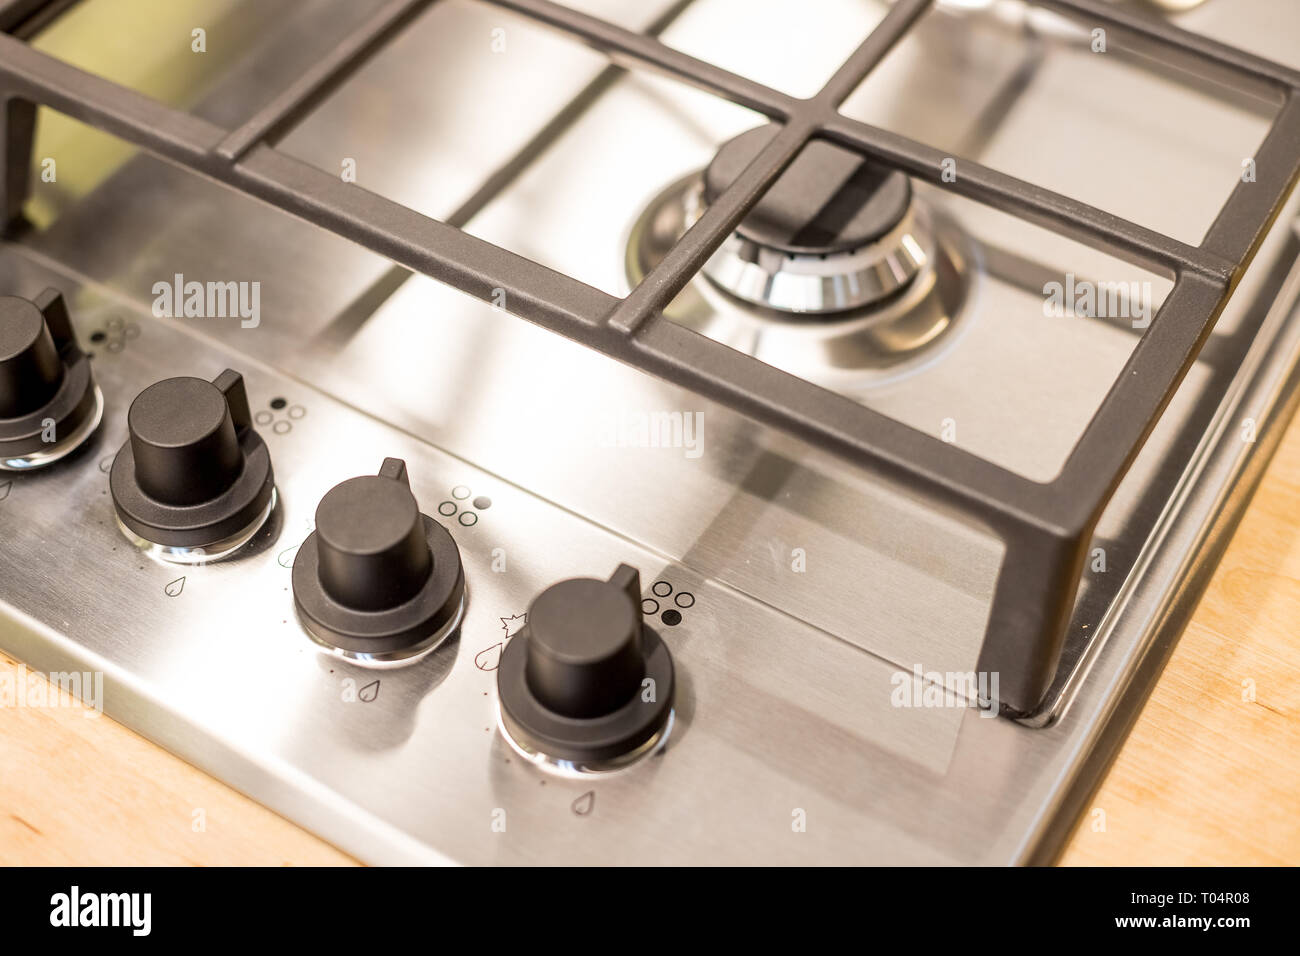 Cooker Element High Resolution Stock Photography and Images - Alamy